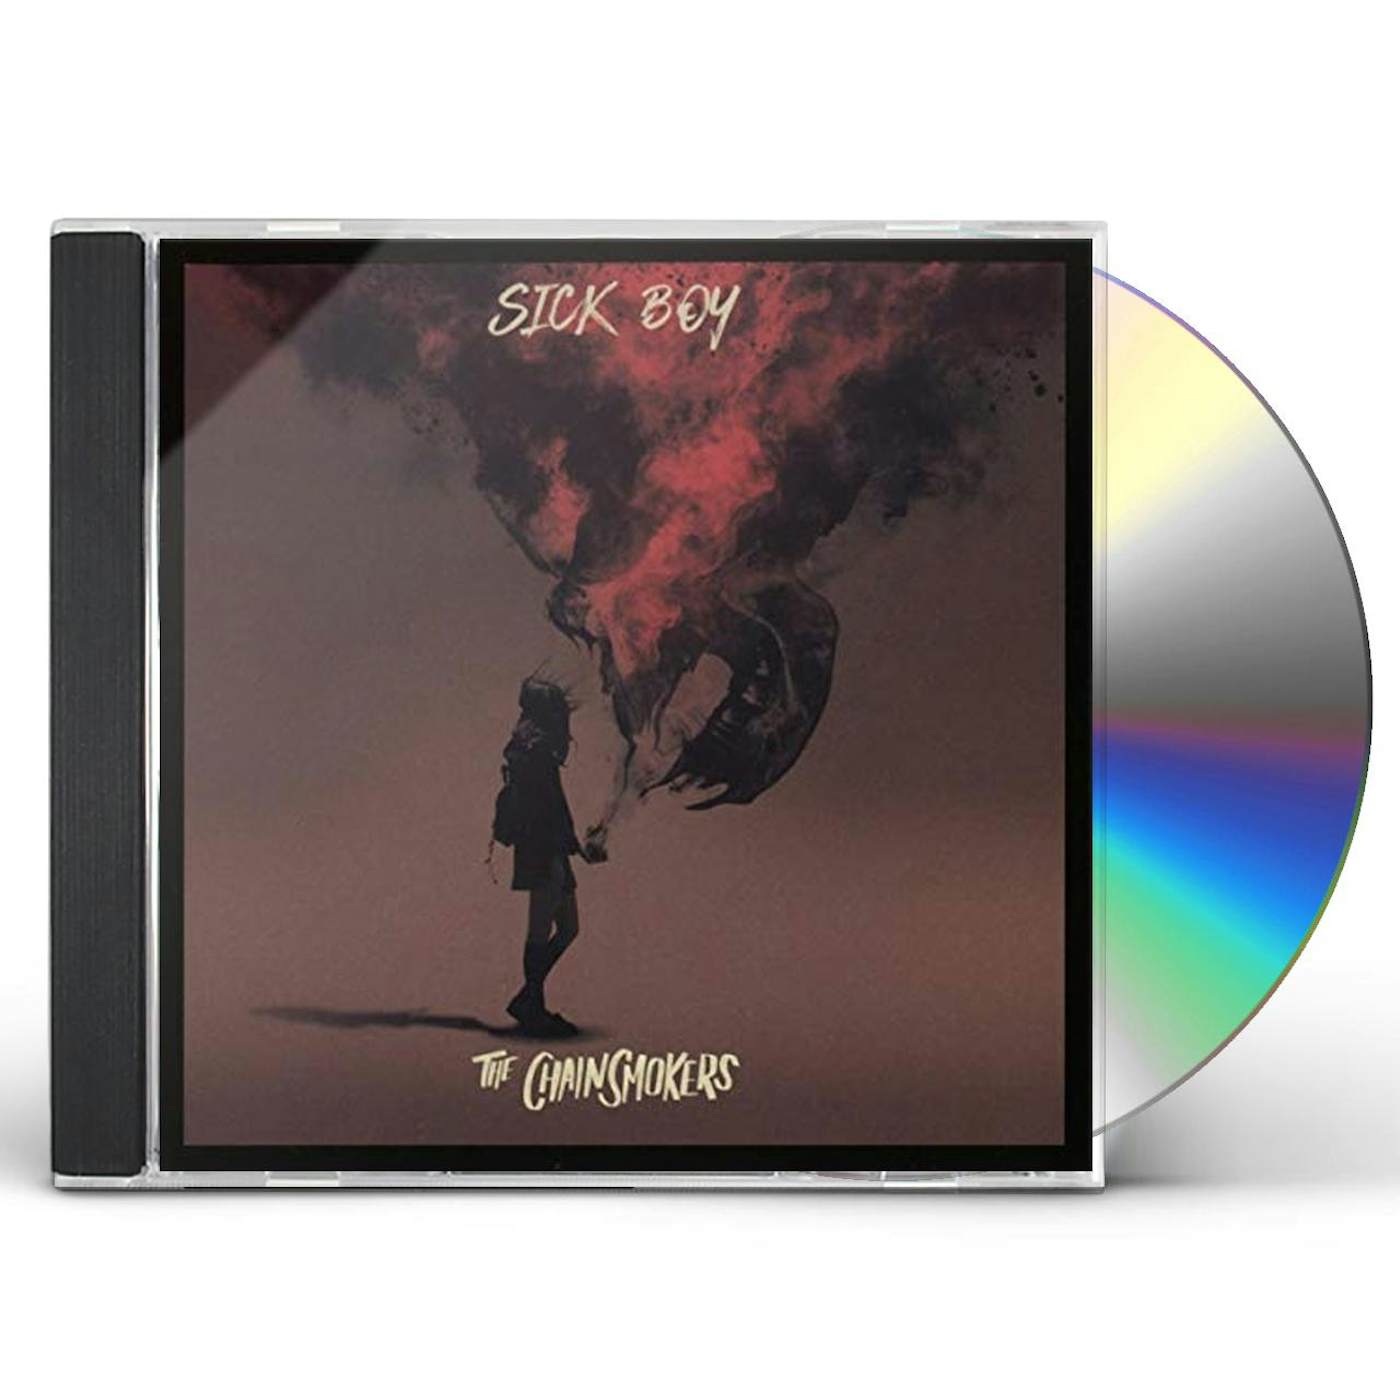 The Chainsmokers SICK BOY SAVE YOURSELF CD